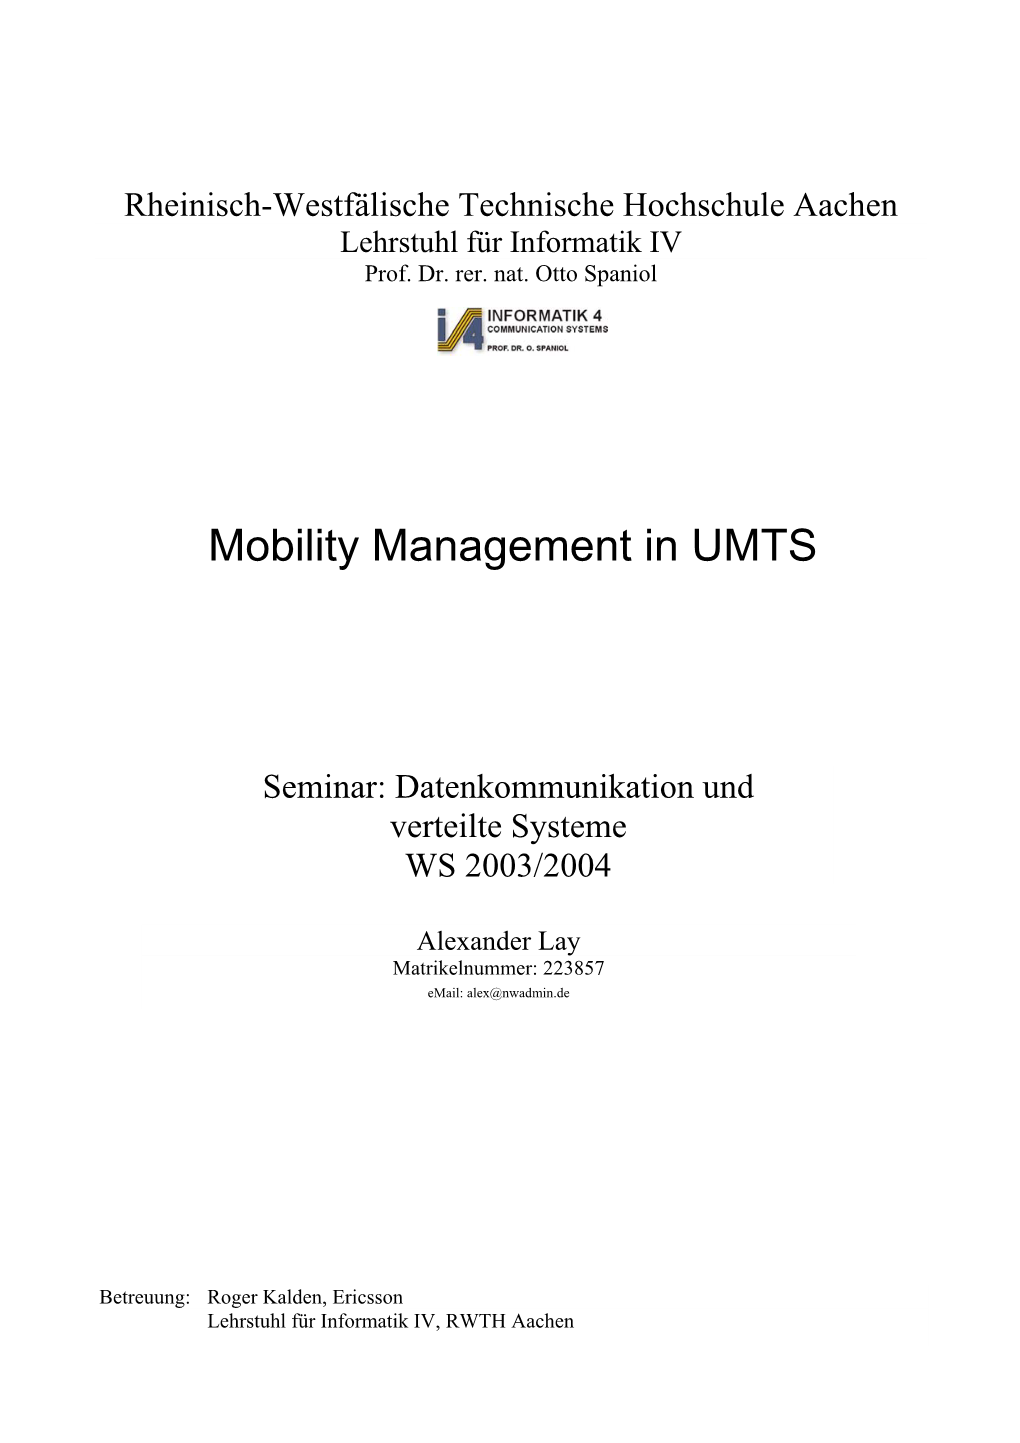 Mobility Management in UMTS